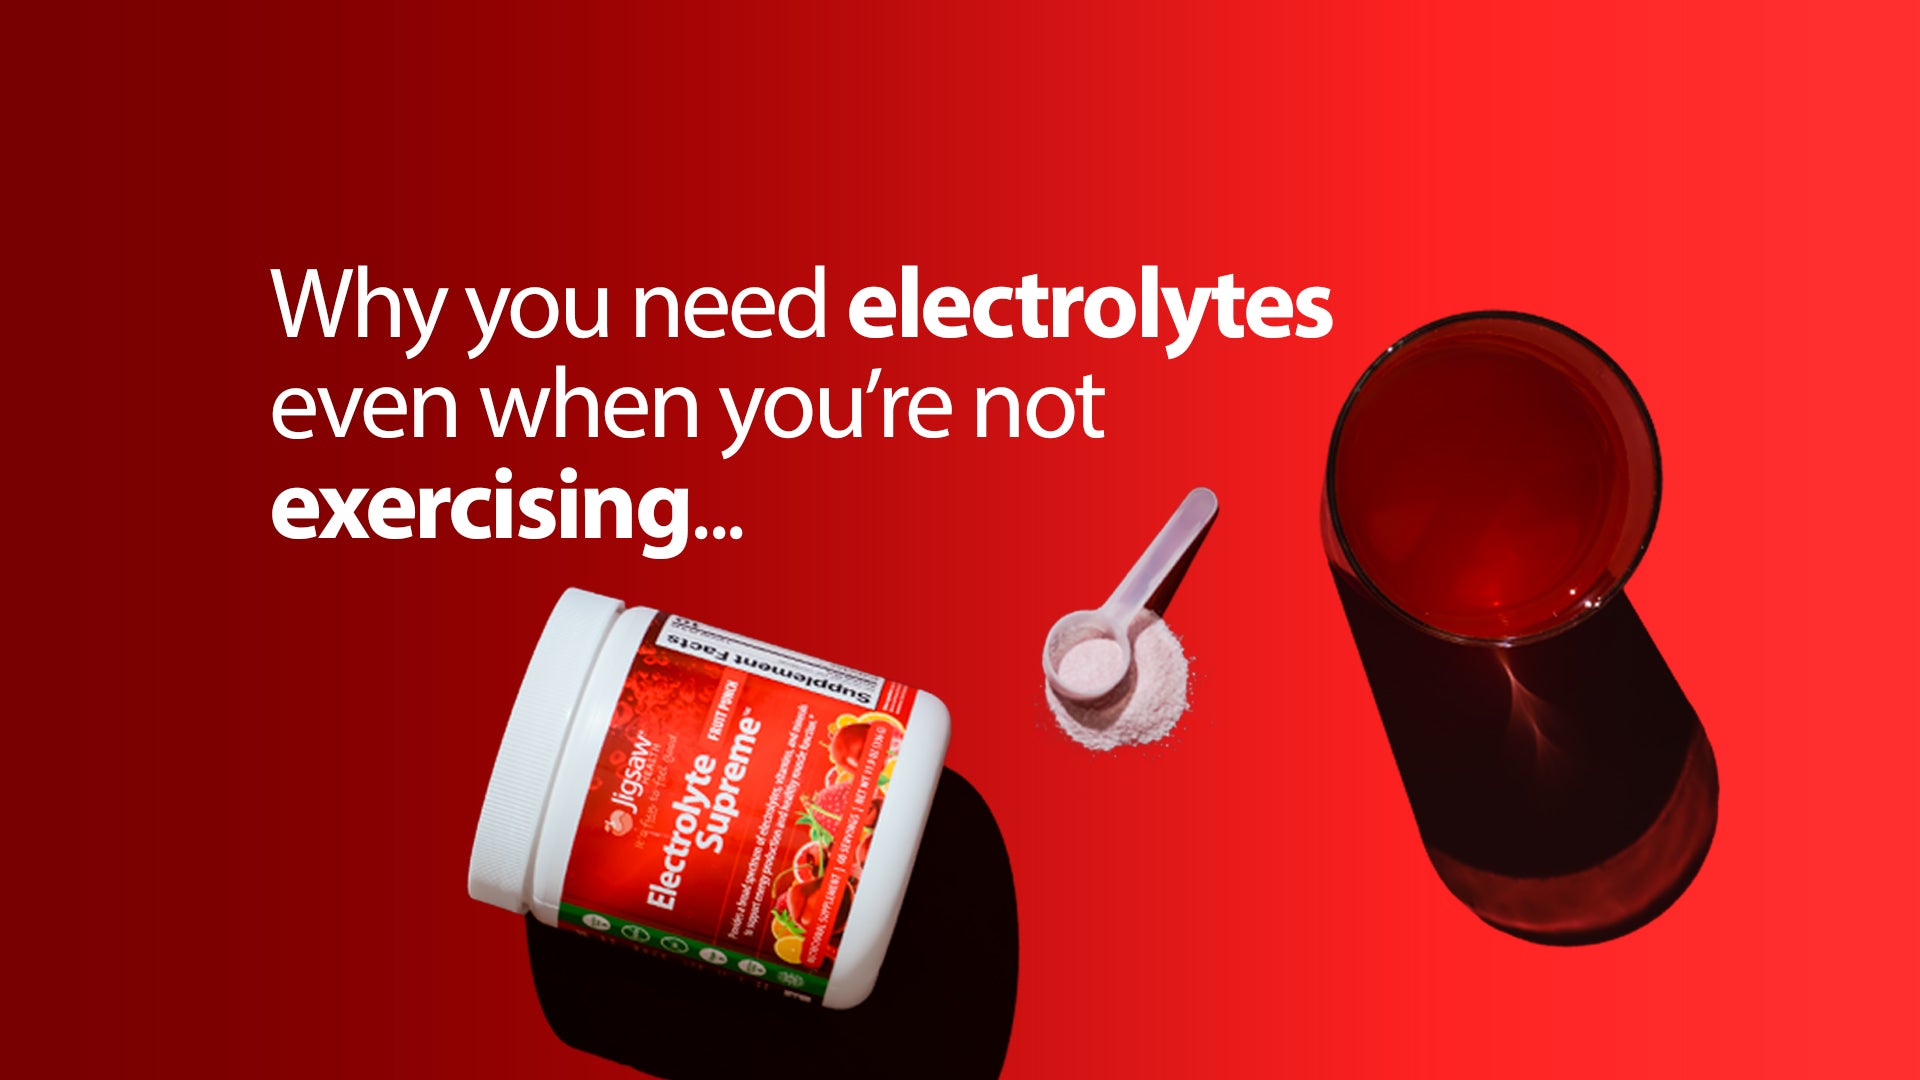 Why You Need Electrolytes Even When You’re Not Exercising